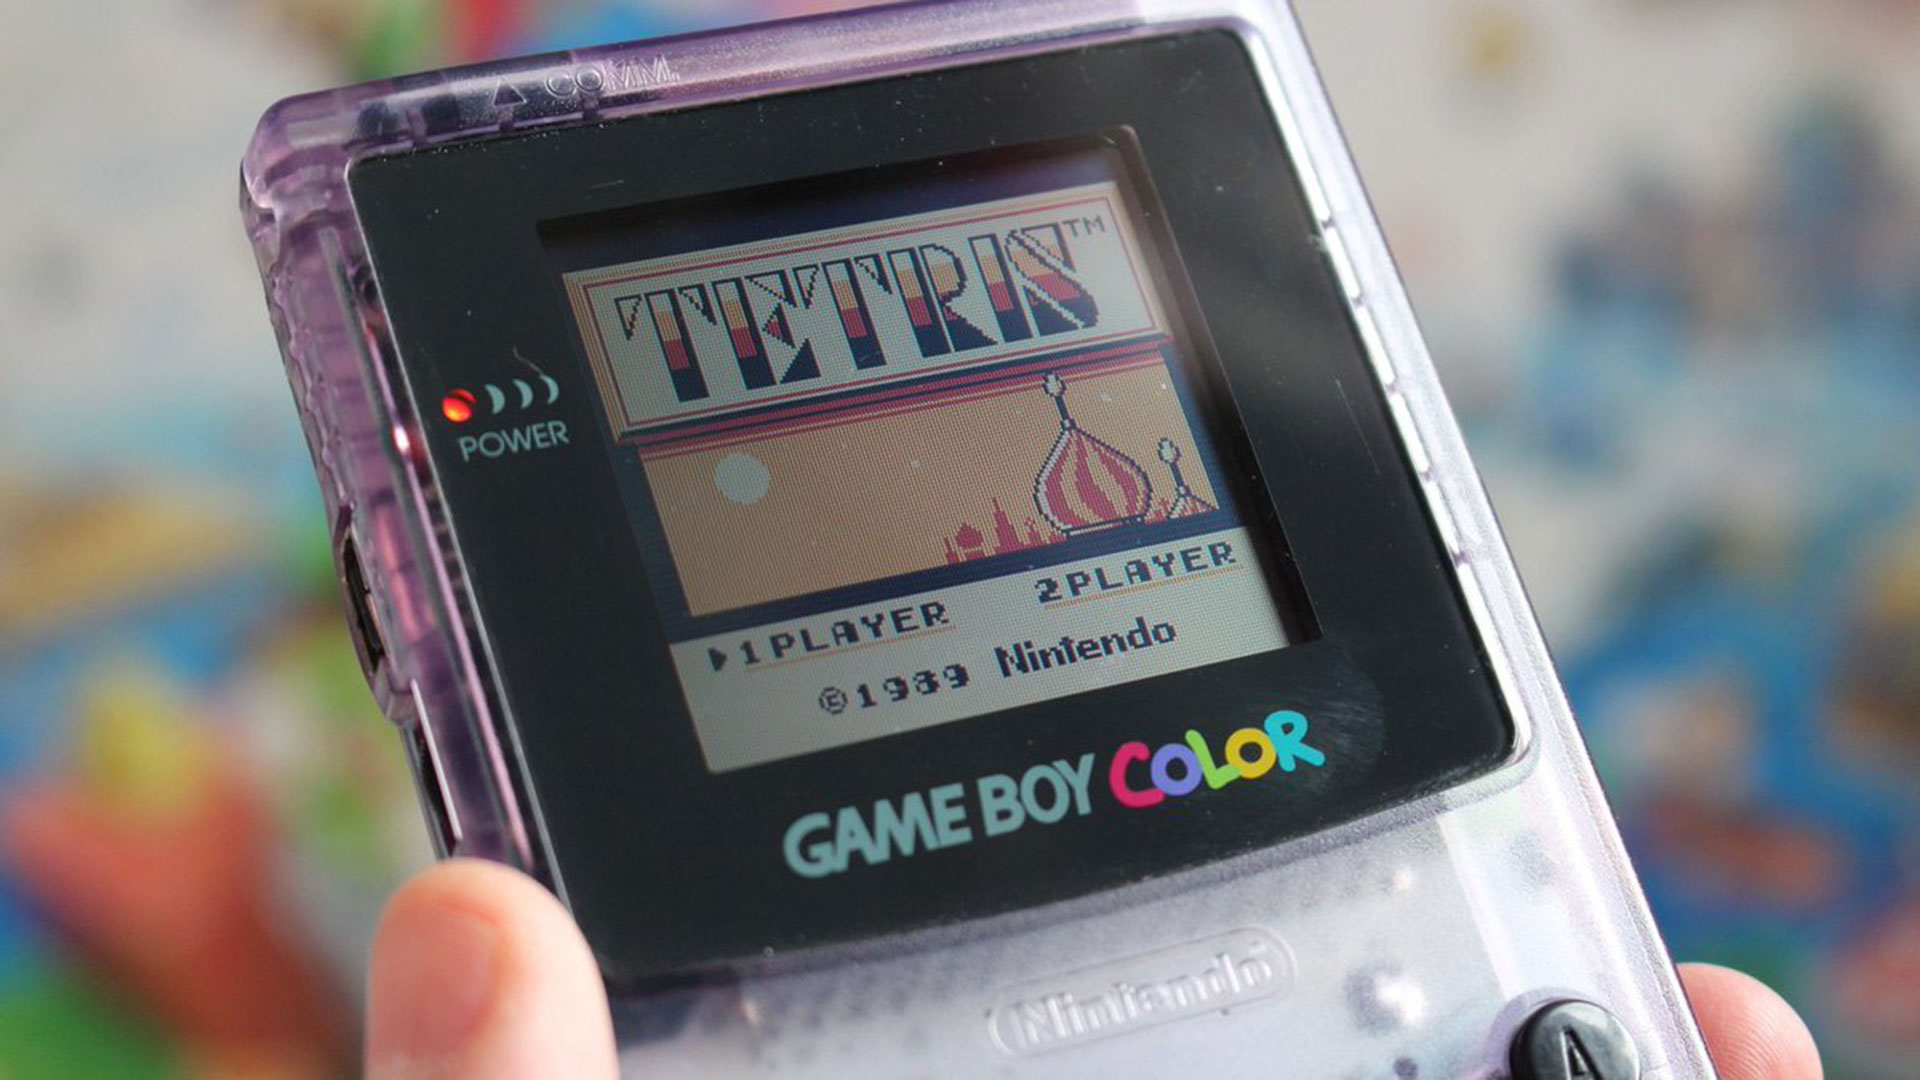 Game Boy Color: 10 games that revolutionized portability in video